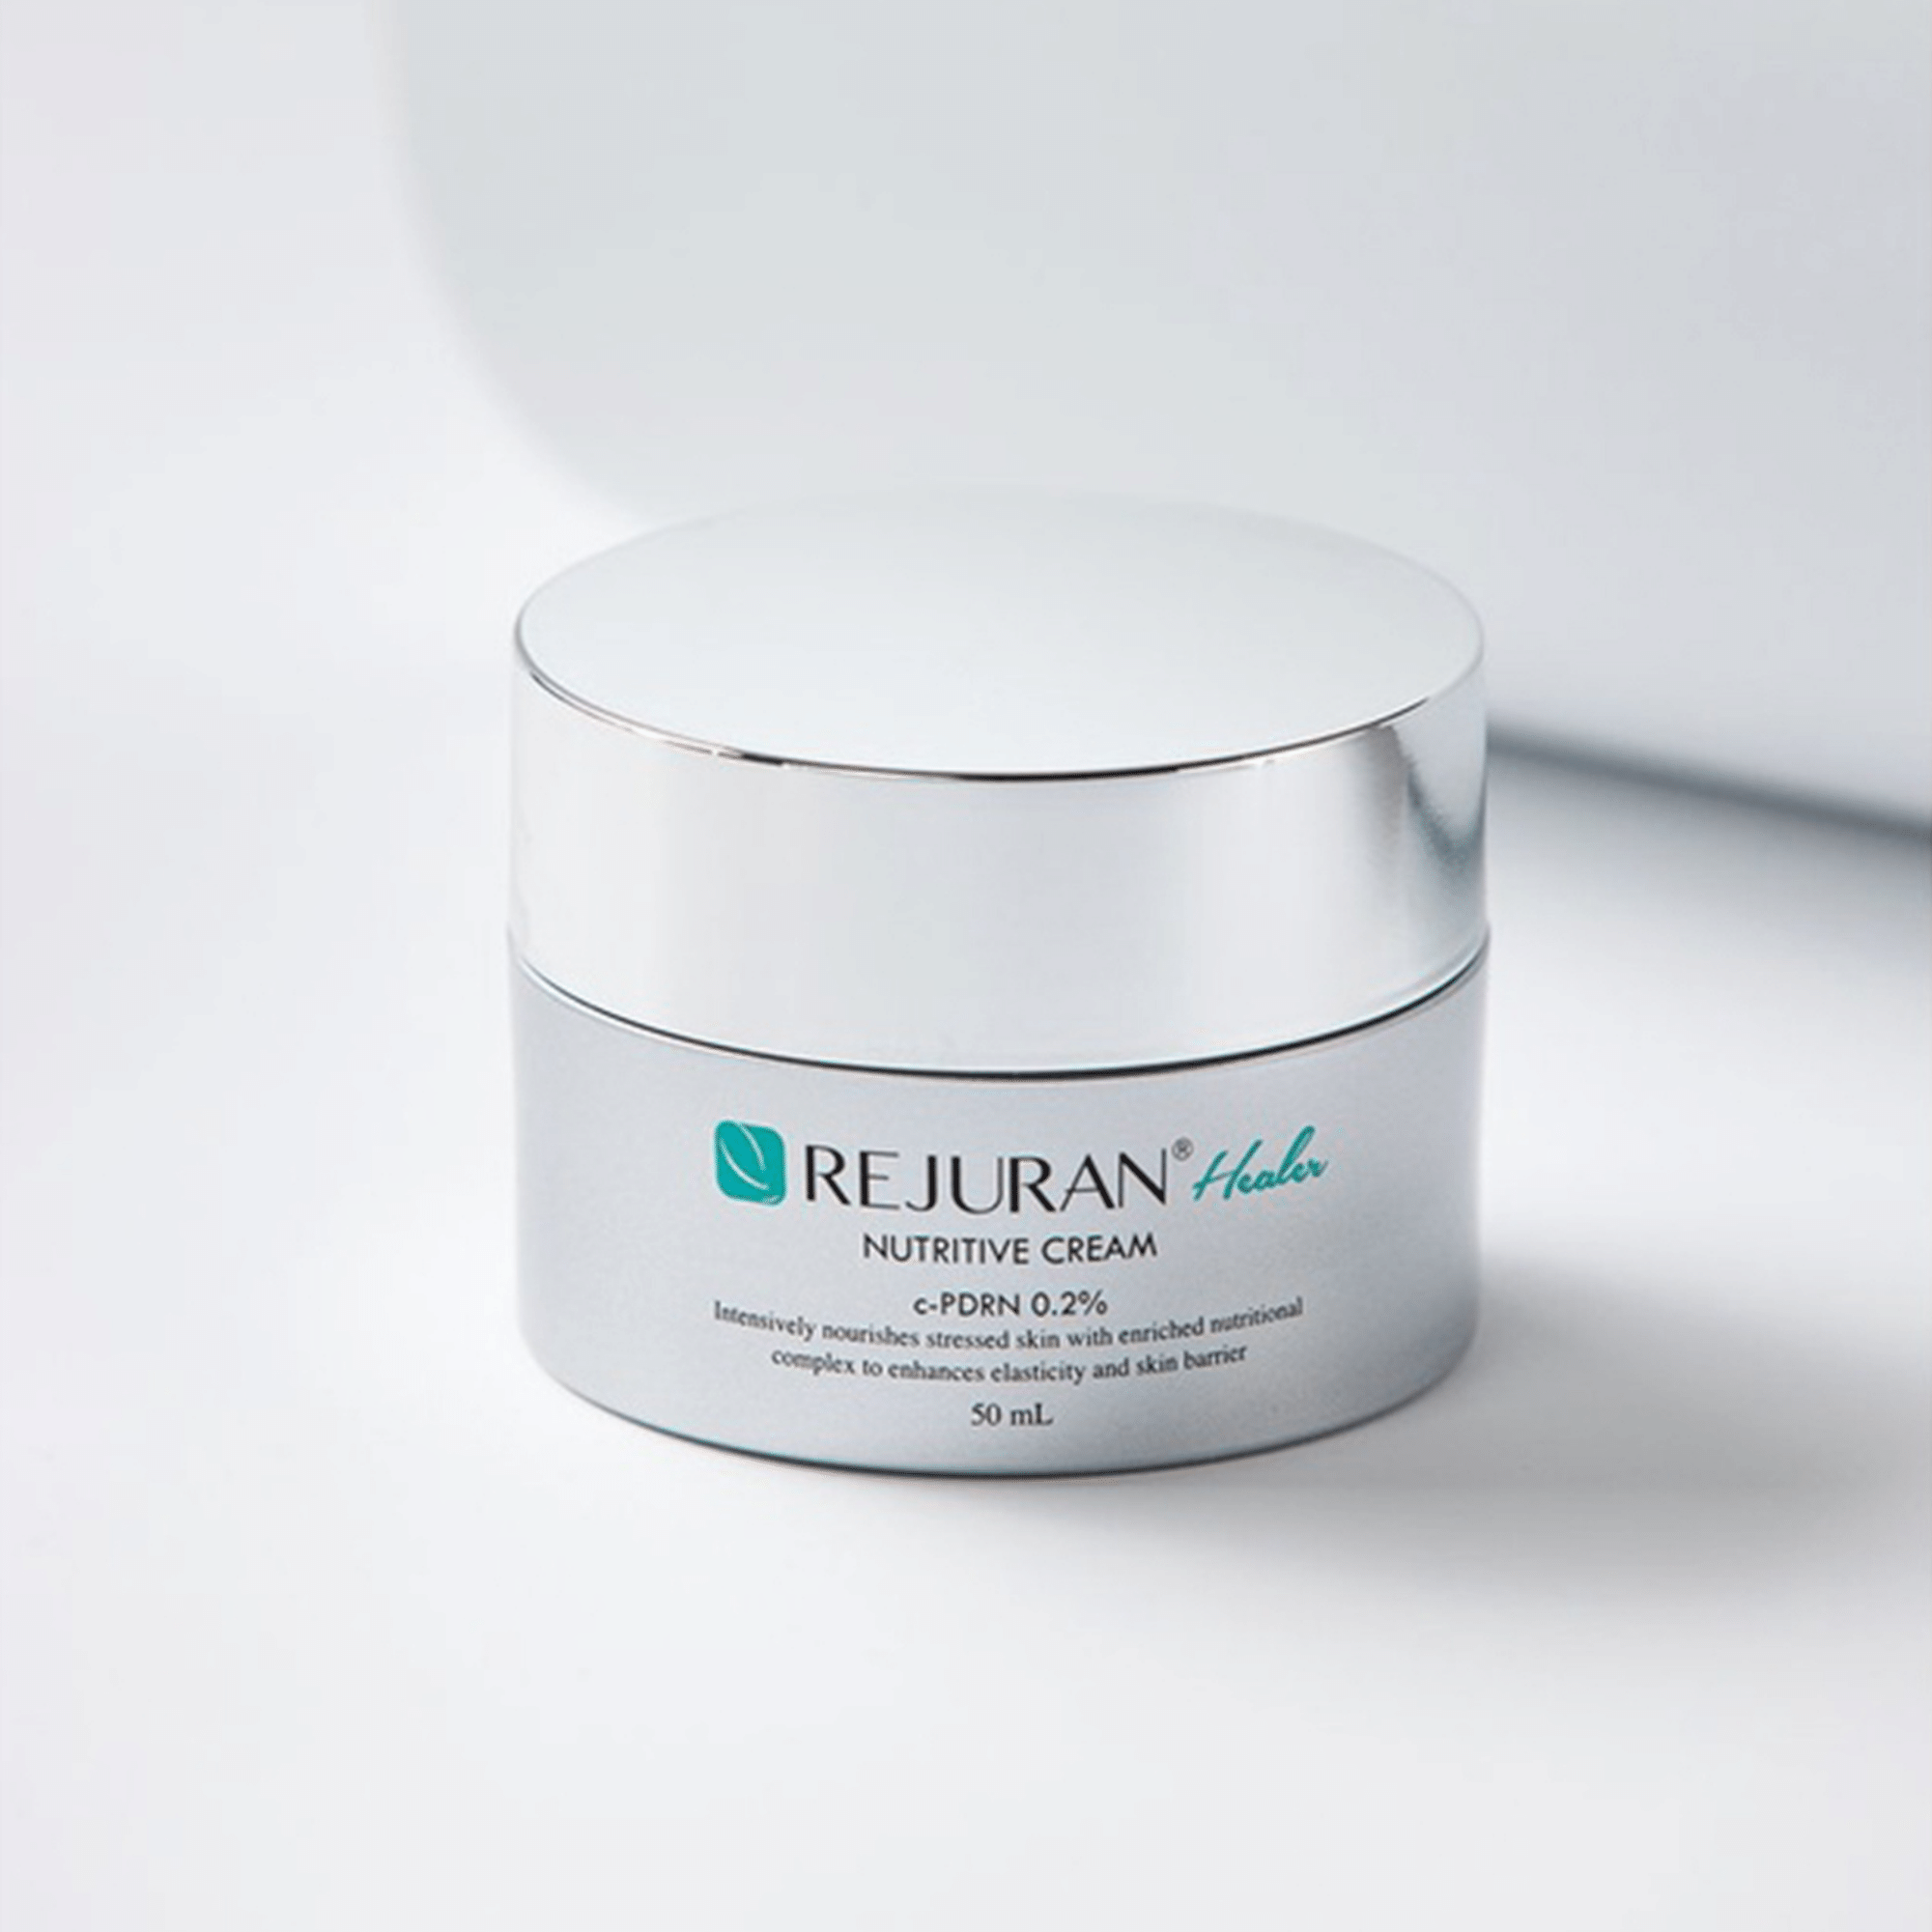 rejuran malaysia nutritive cream helps visibly heal and renew dry, damaged skin with restorative moisture and nutrients while soothing and revitalizing your complexion for glowing, younger-looking skin